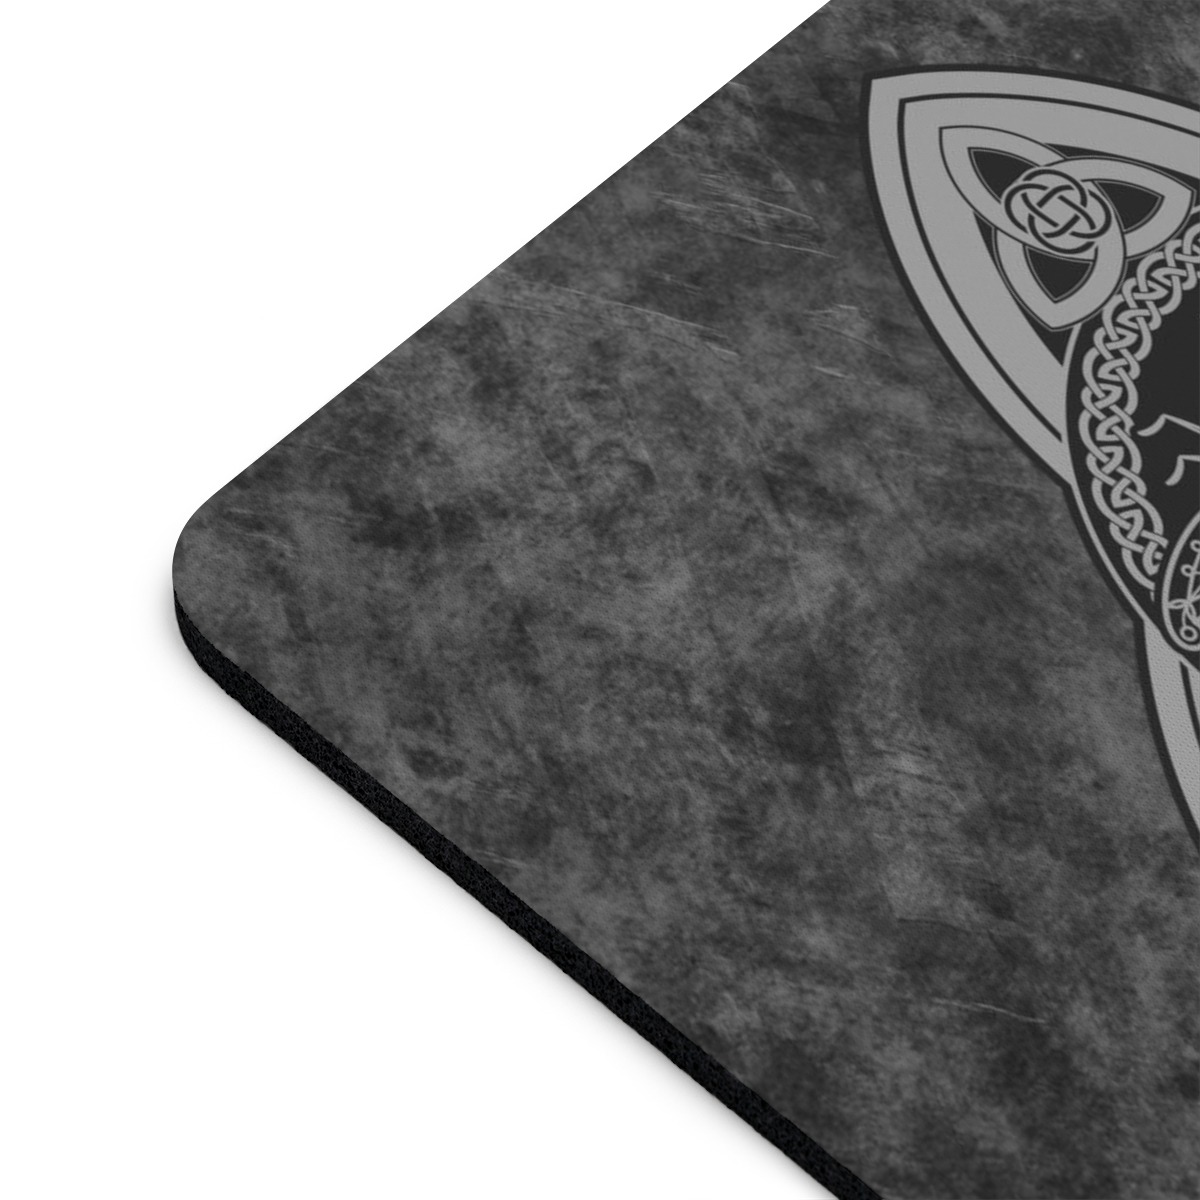 Gray Celtic Dragonfly Mouse Pad